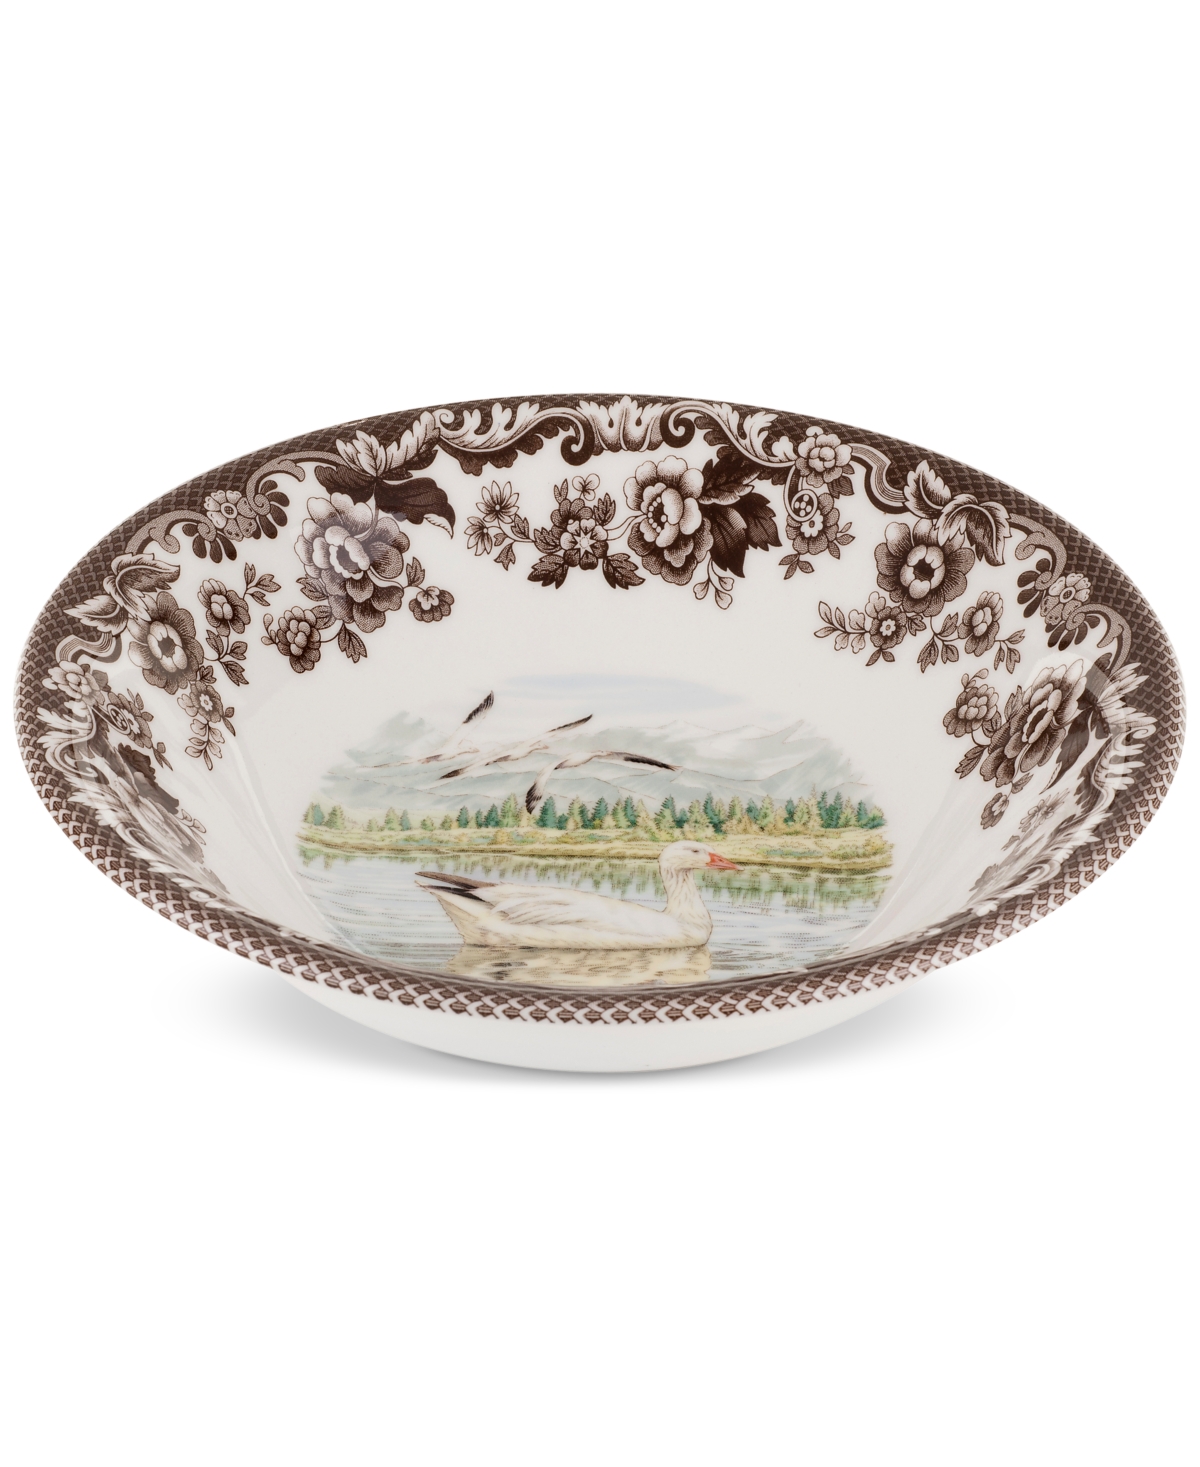 Woodland Snow Goose Cereal Bowl - Brown